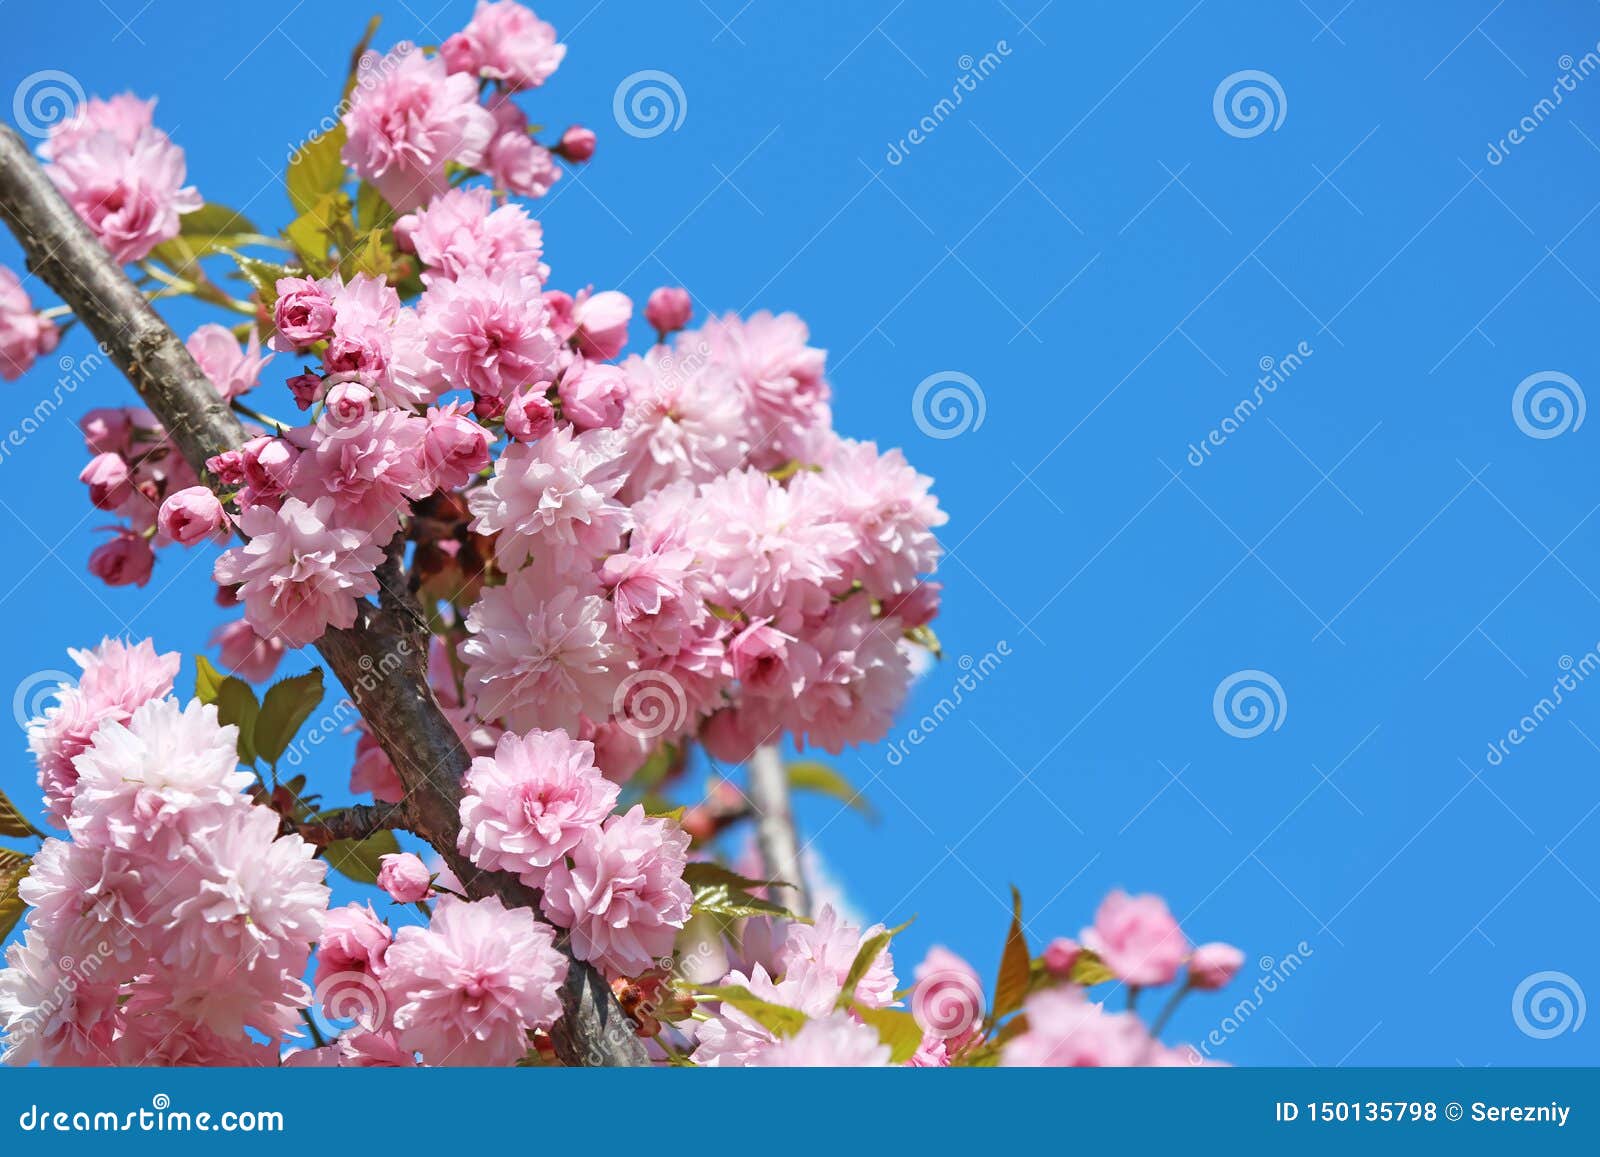 Beautiful Blossoming Tree Branches on Sky Background Stock Photo